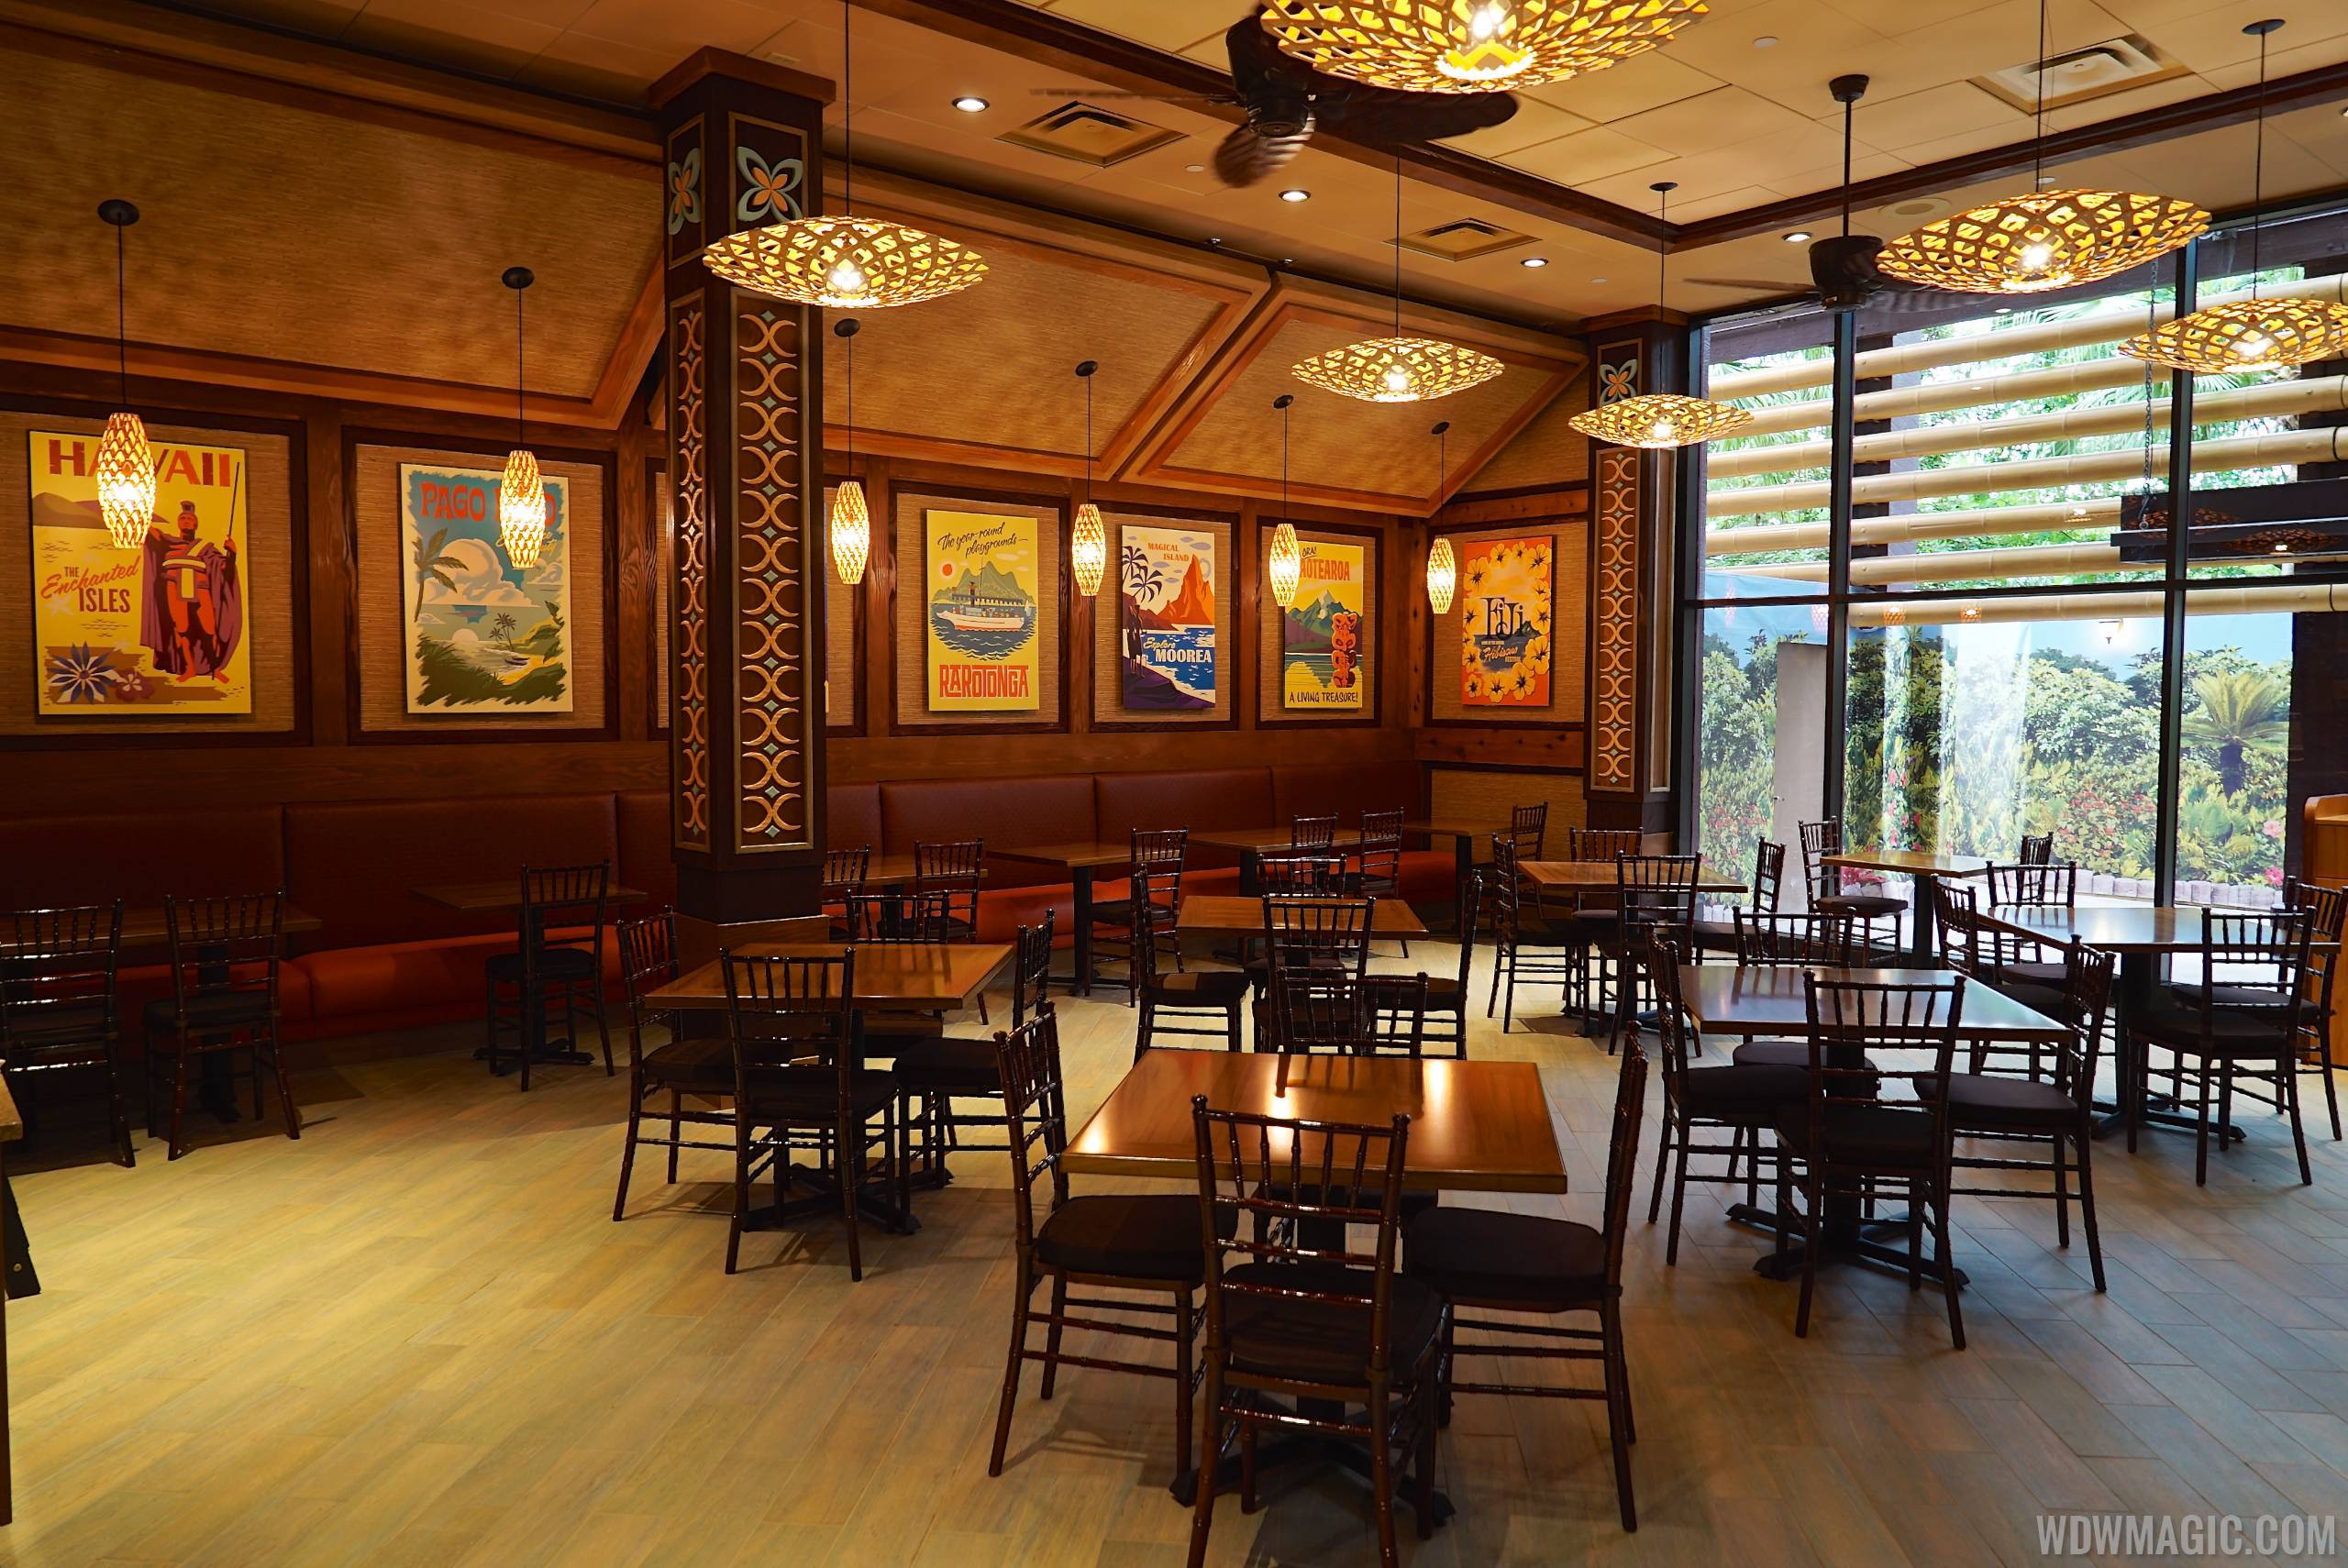 PHOTOS - Newly refurbished Captain Cook's reopens at Disney's Polynesian Village Resort